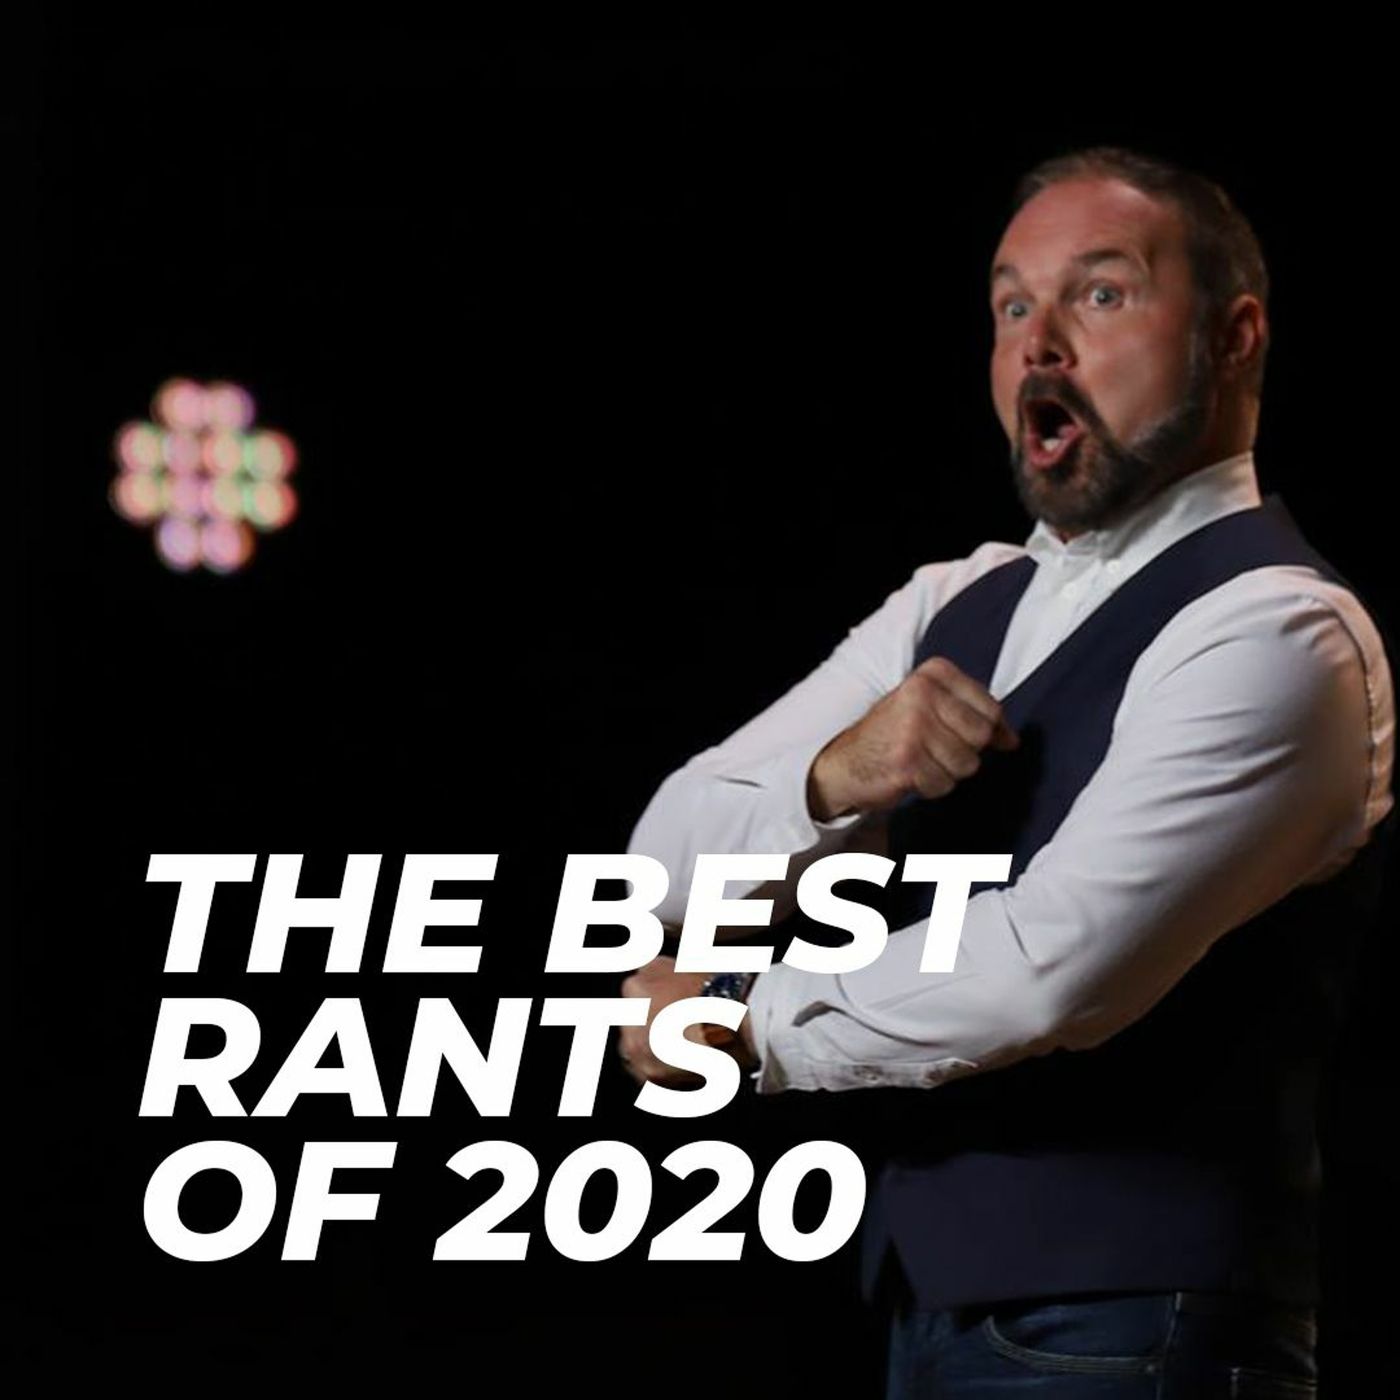 The Best Rants of 2020